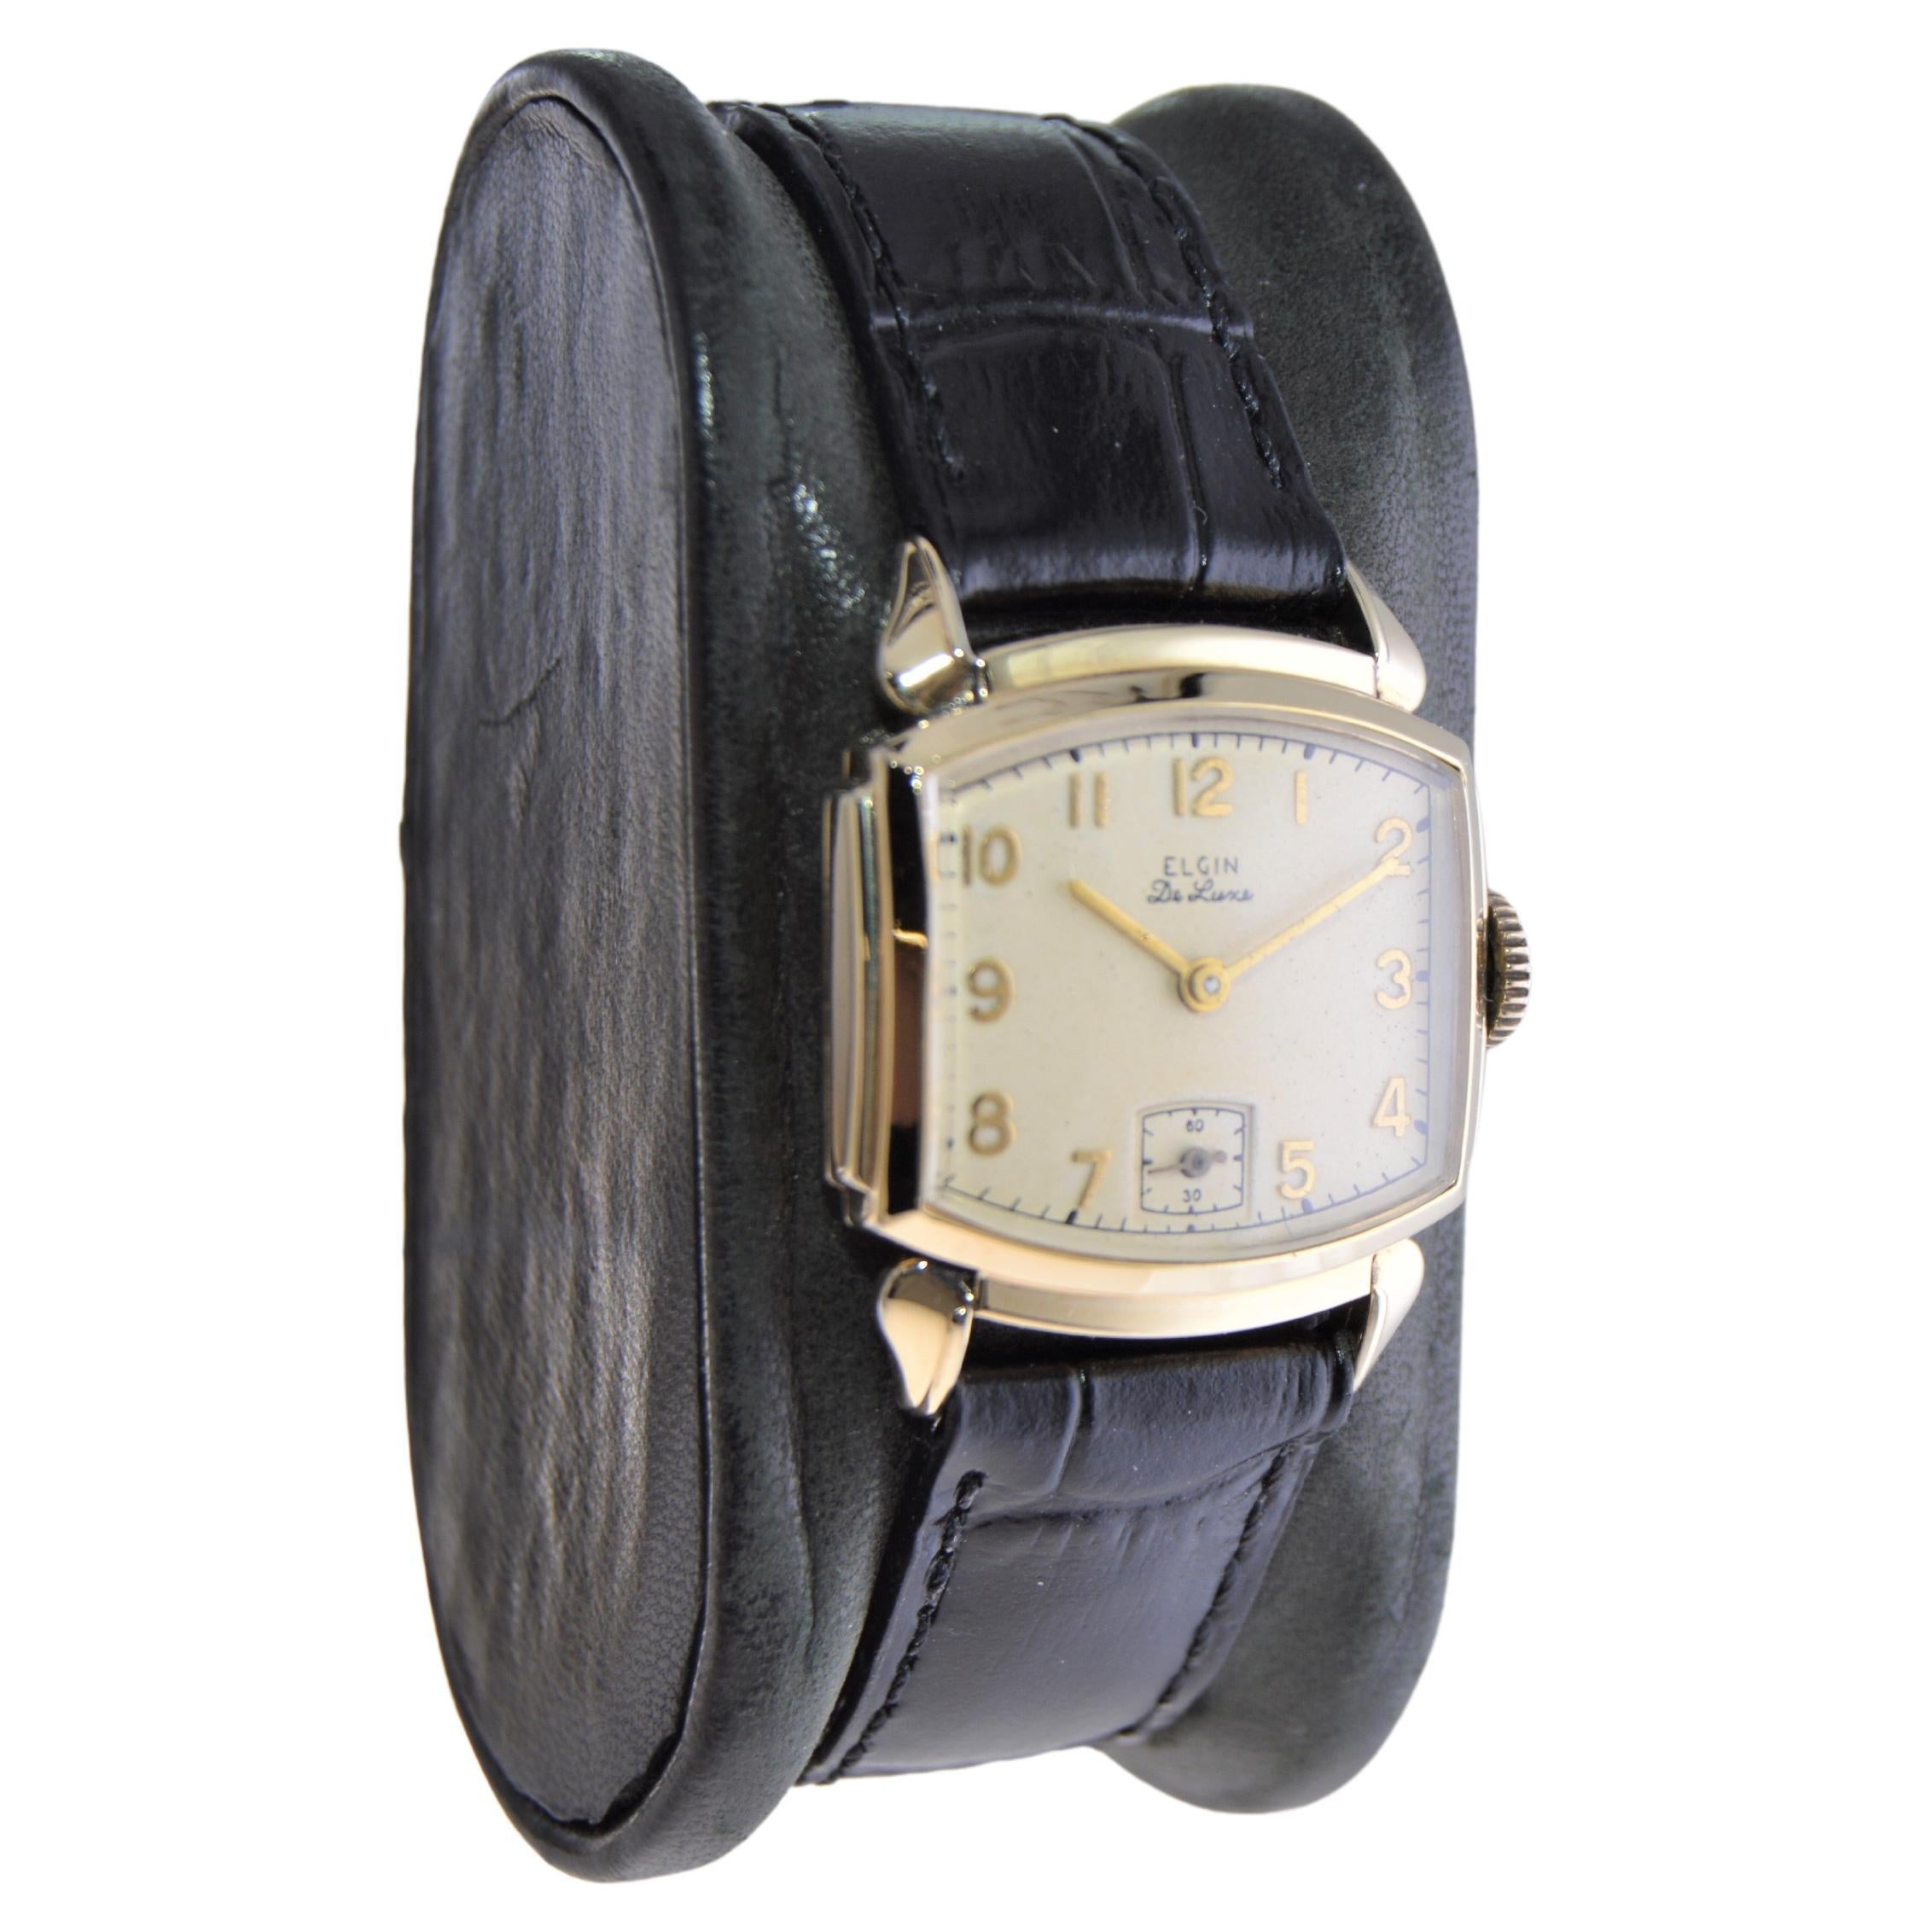 FACTORY / HOUSE: Elgin
STYLE / REFERENCE: Art Deco / Tortue Shape
METAL / MATERIAL: 14Kt. Yellow Gold Filled
CIRCA / YEAR: 1940's
DIMENSIONS / SIZE: 32mm Length X 25mm Width
MOVEMENT / CALIBER: Manual Winding / 17 Jewels  
DIAL / HANDS: Factory